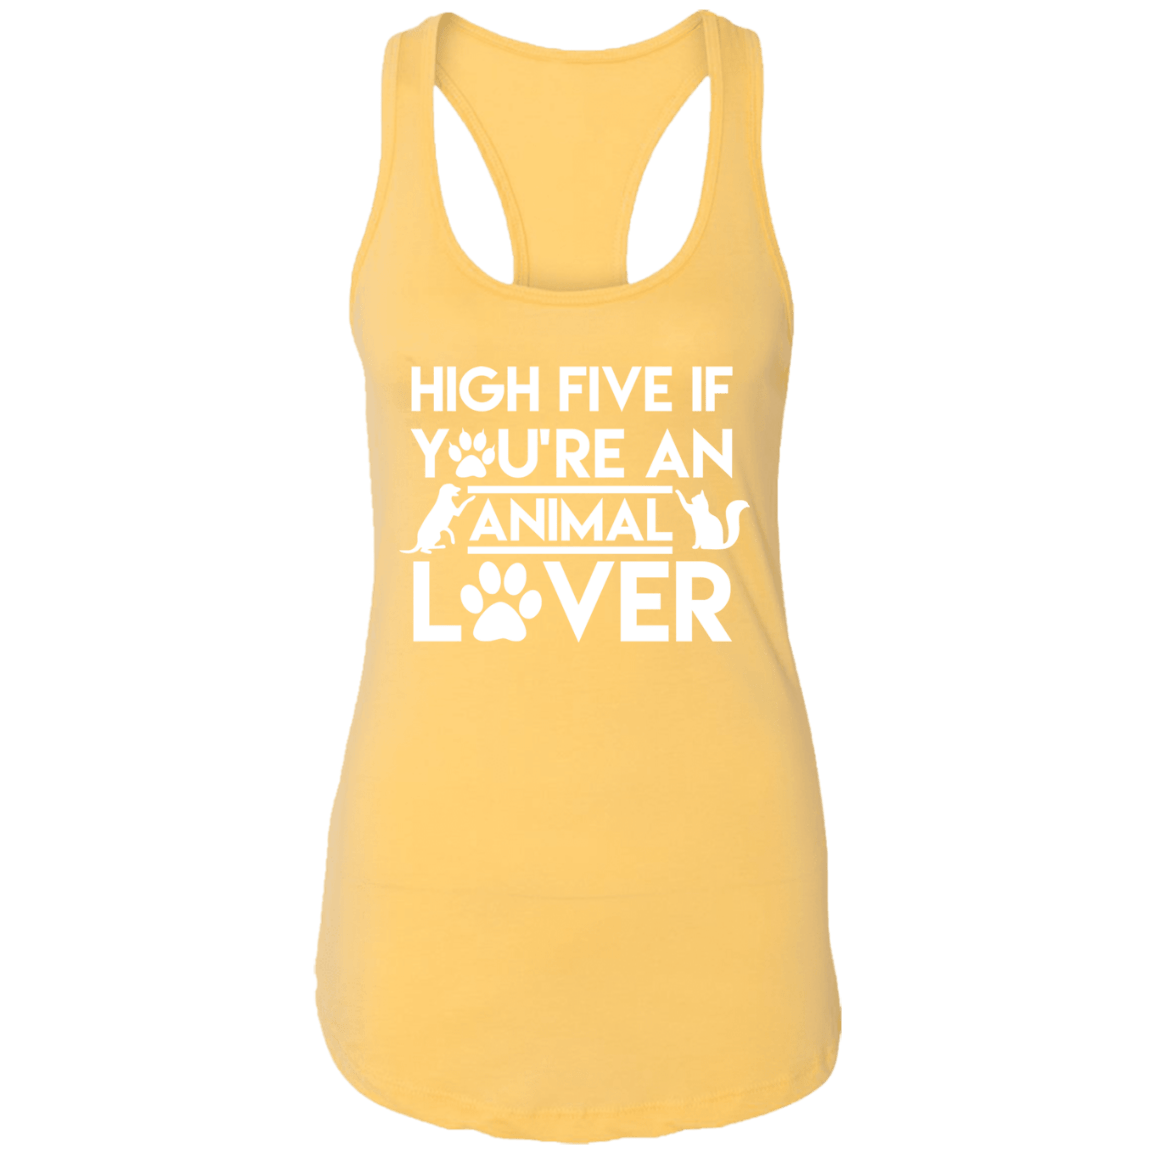 High Five If You're An Animal Lover - Ladies Racer Back Tank.